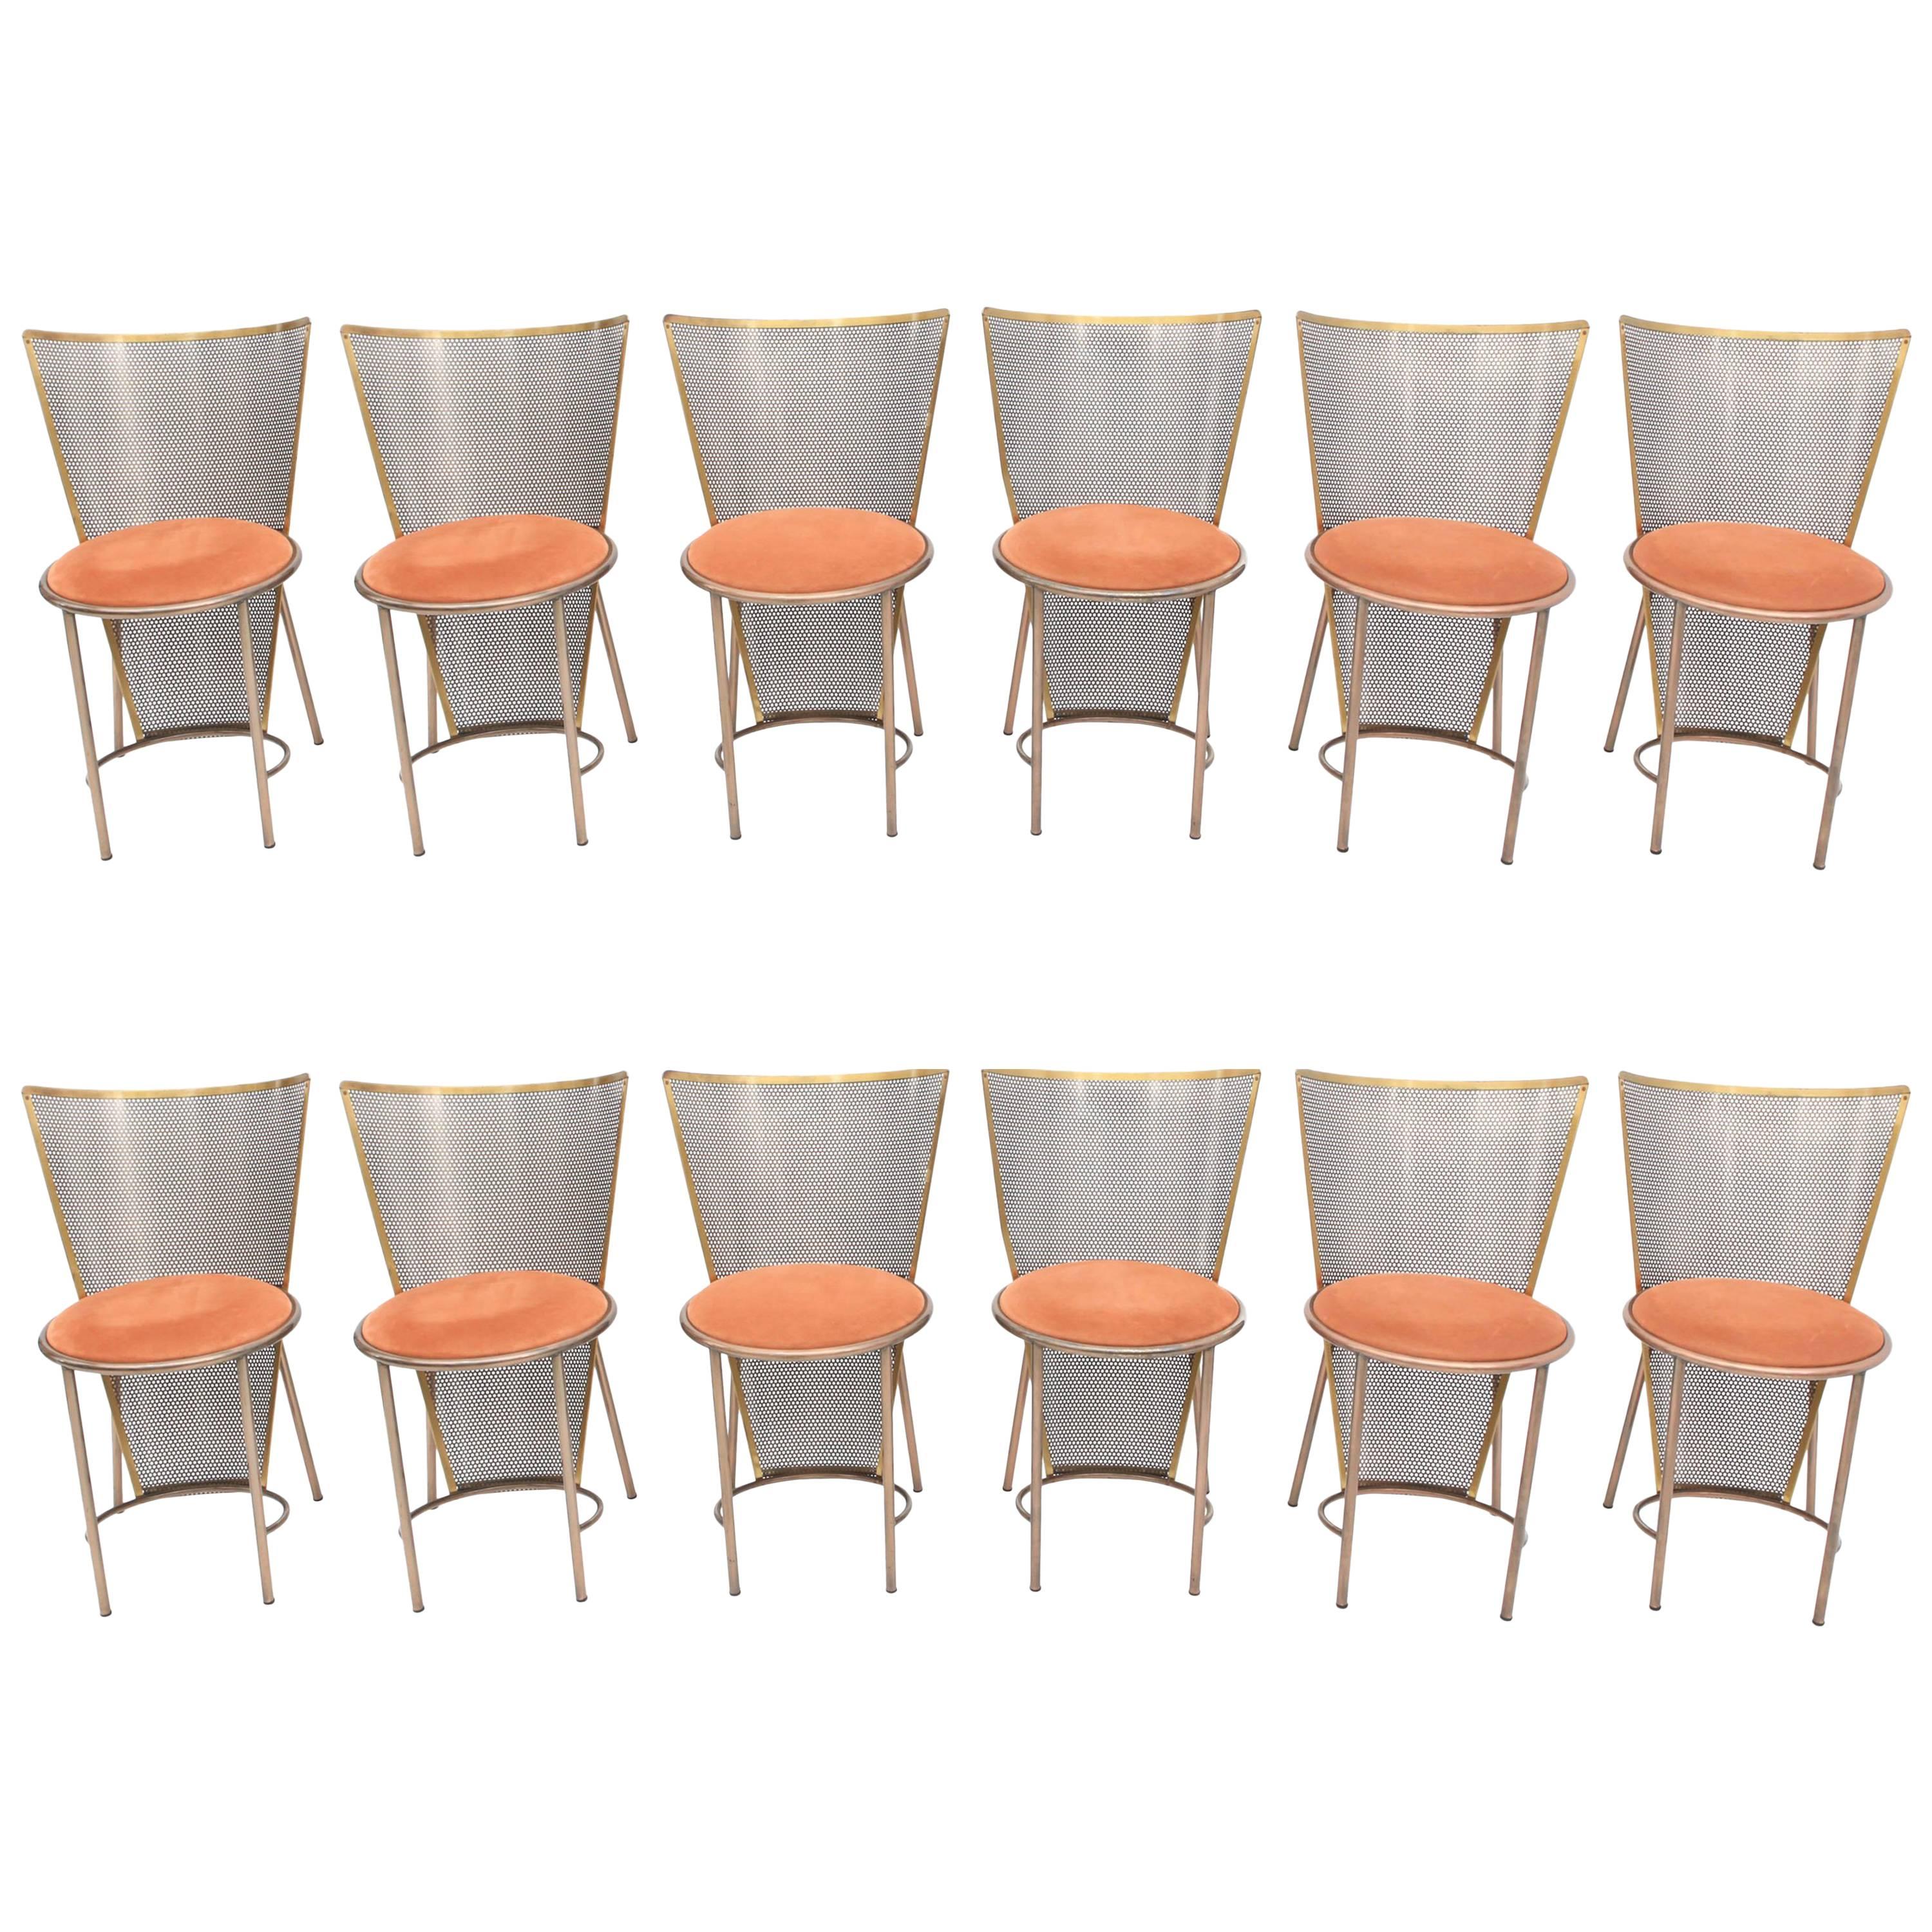 Post-modern Frans Van Praet Limited Edition Expo '92 Brass Chairs